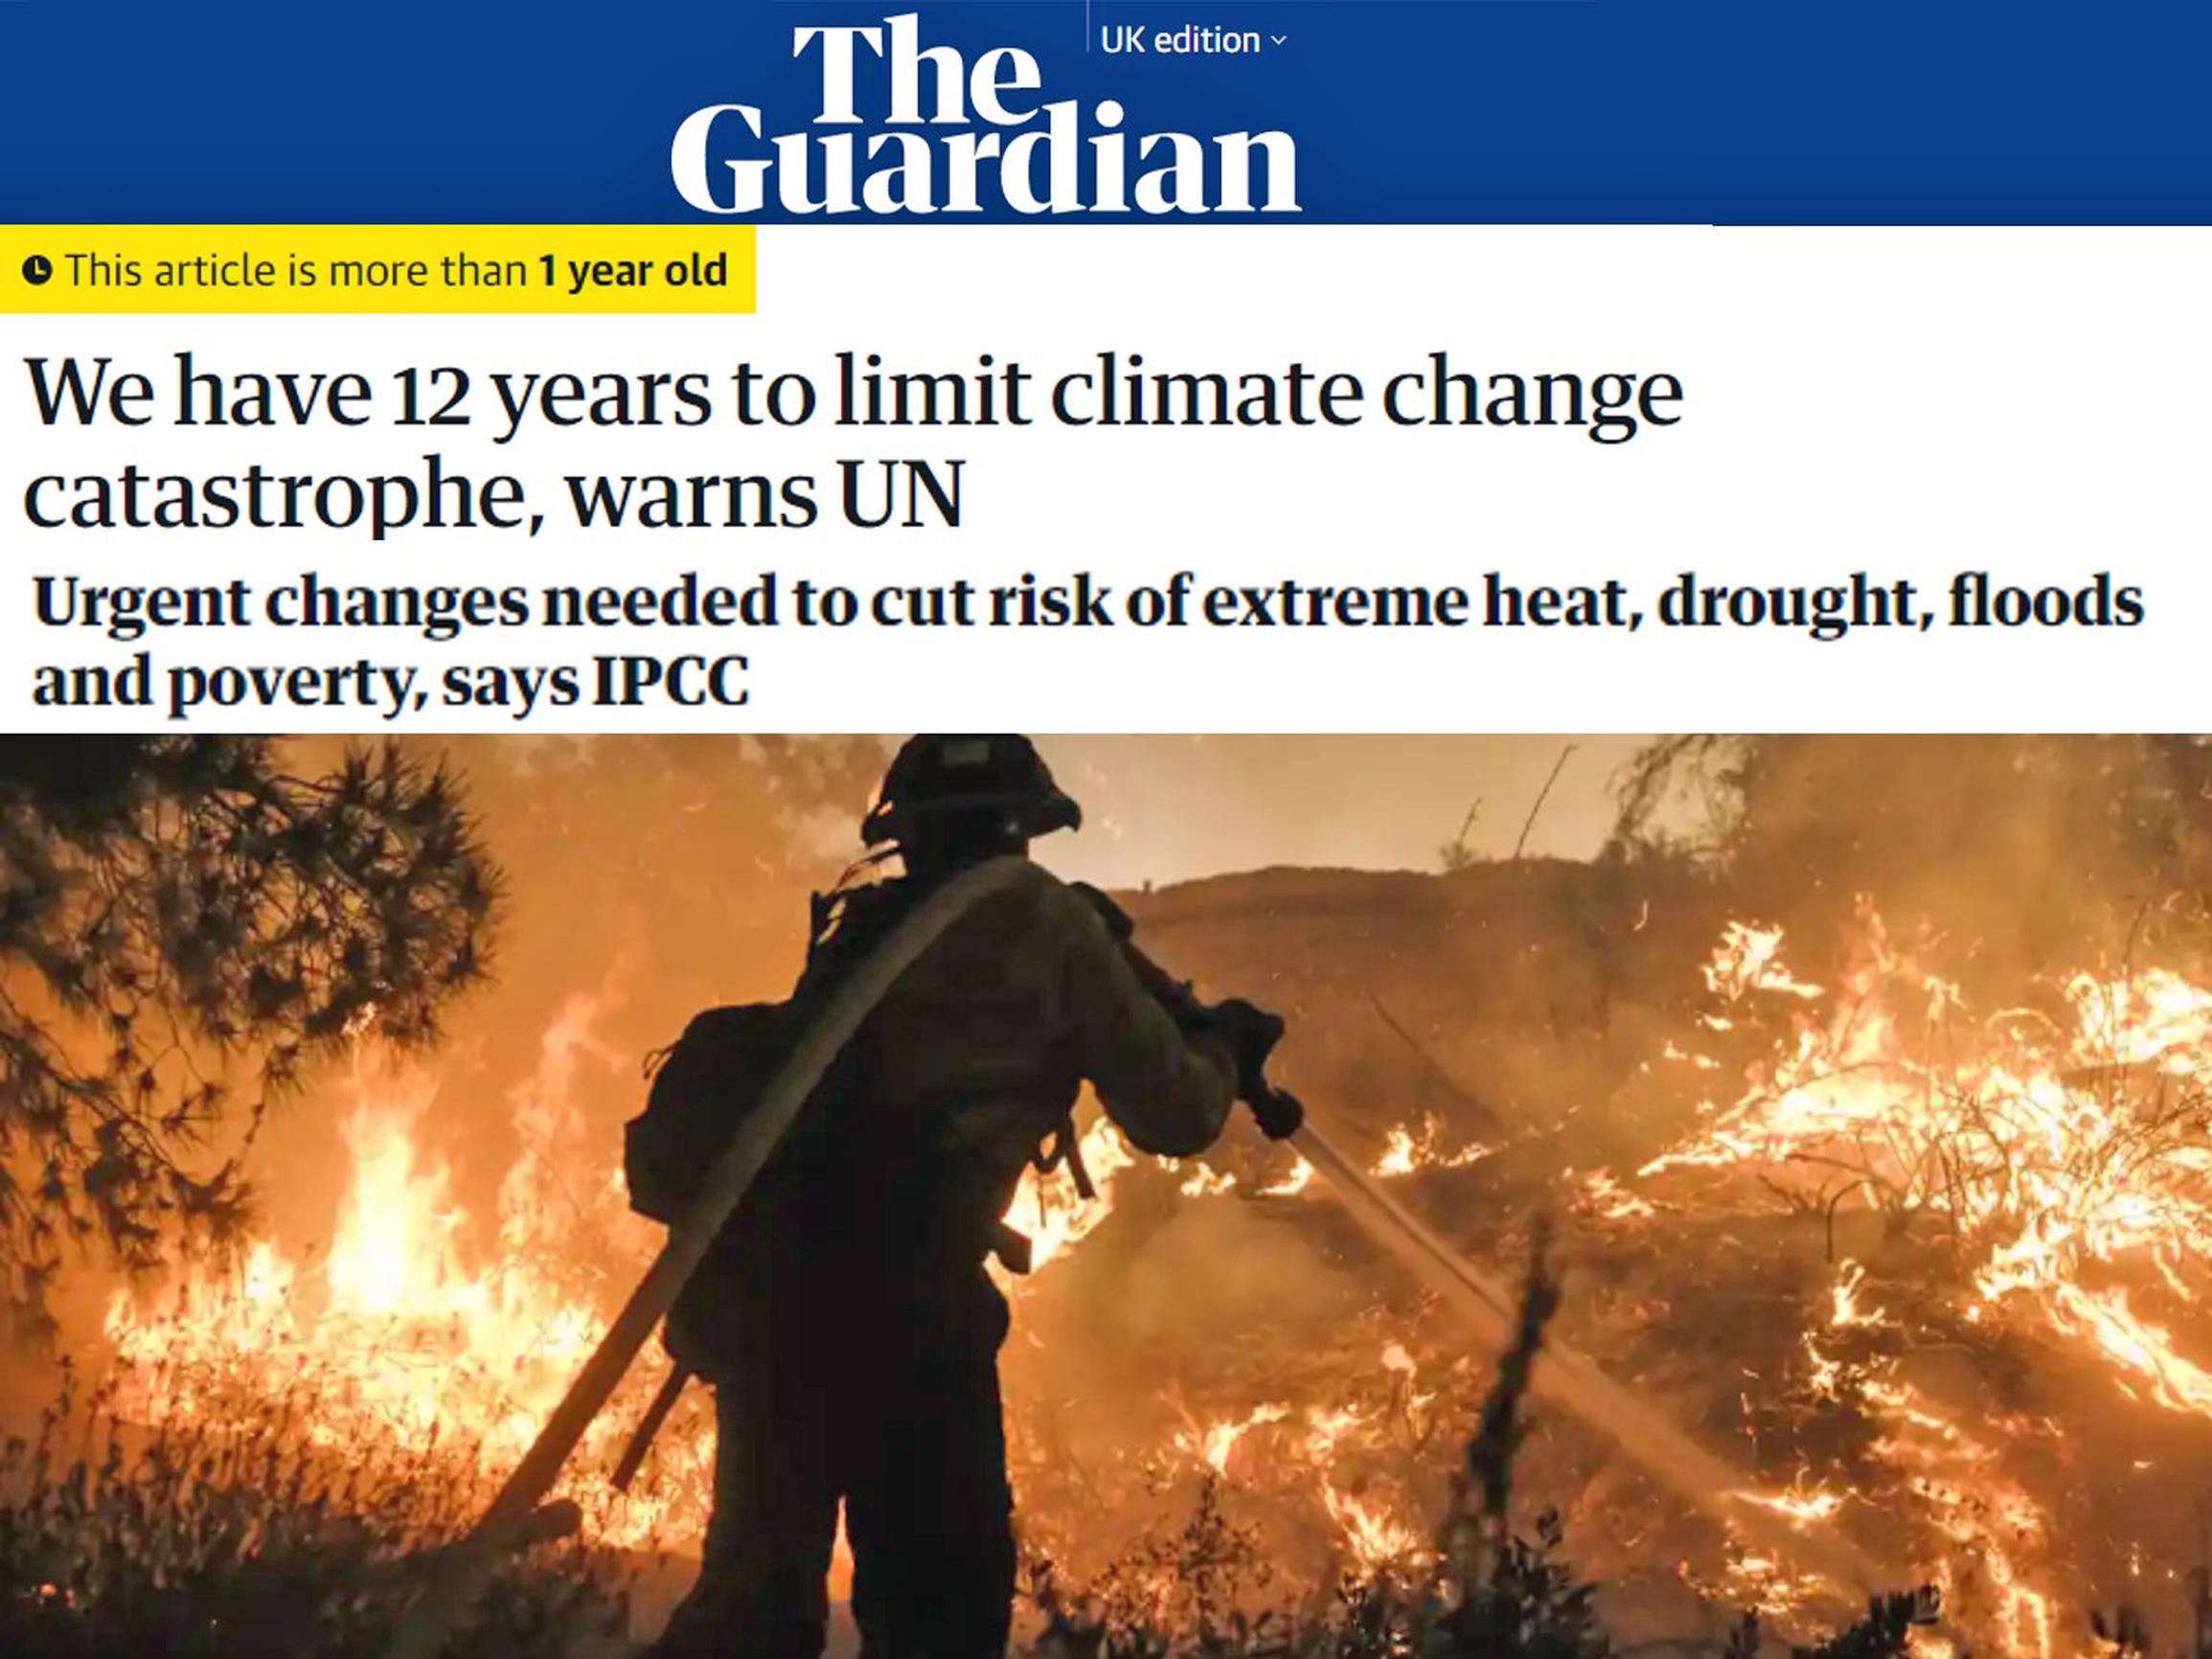 ‘Urgent changes needed.’ This article is more than one year old